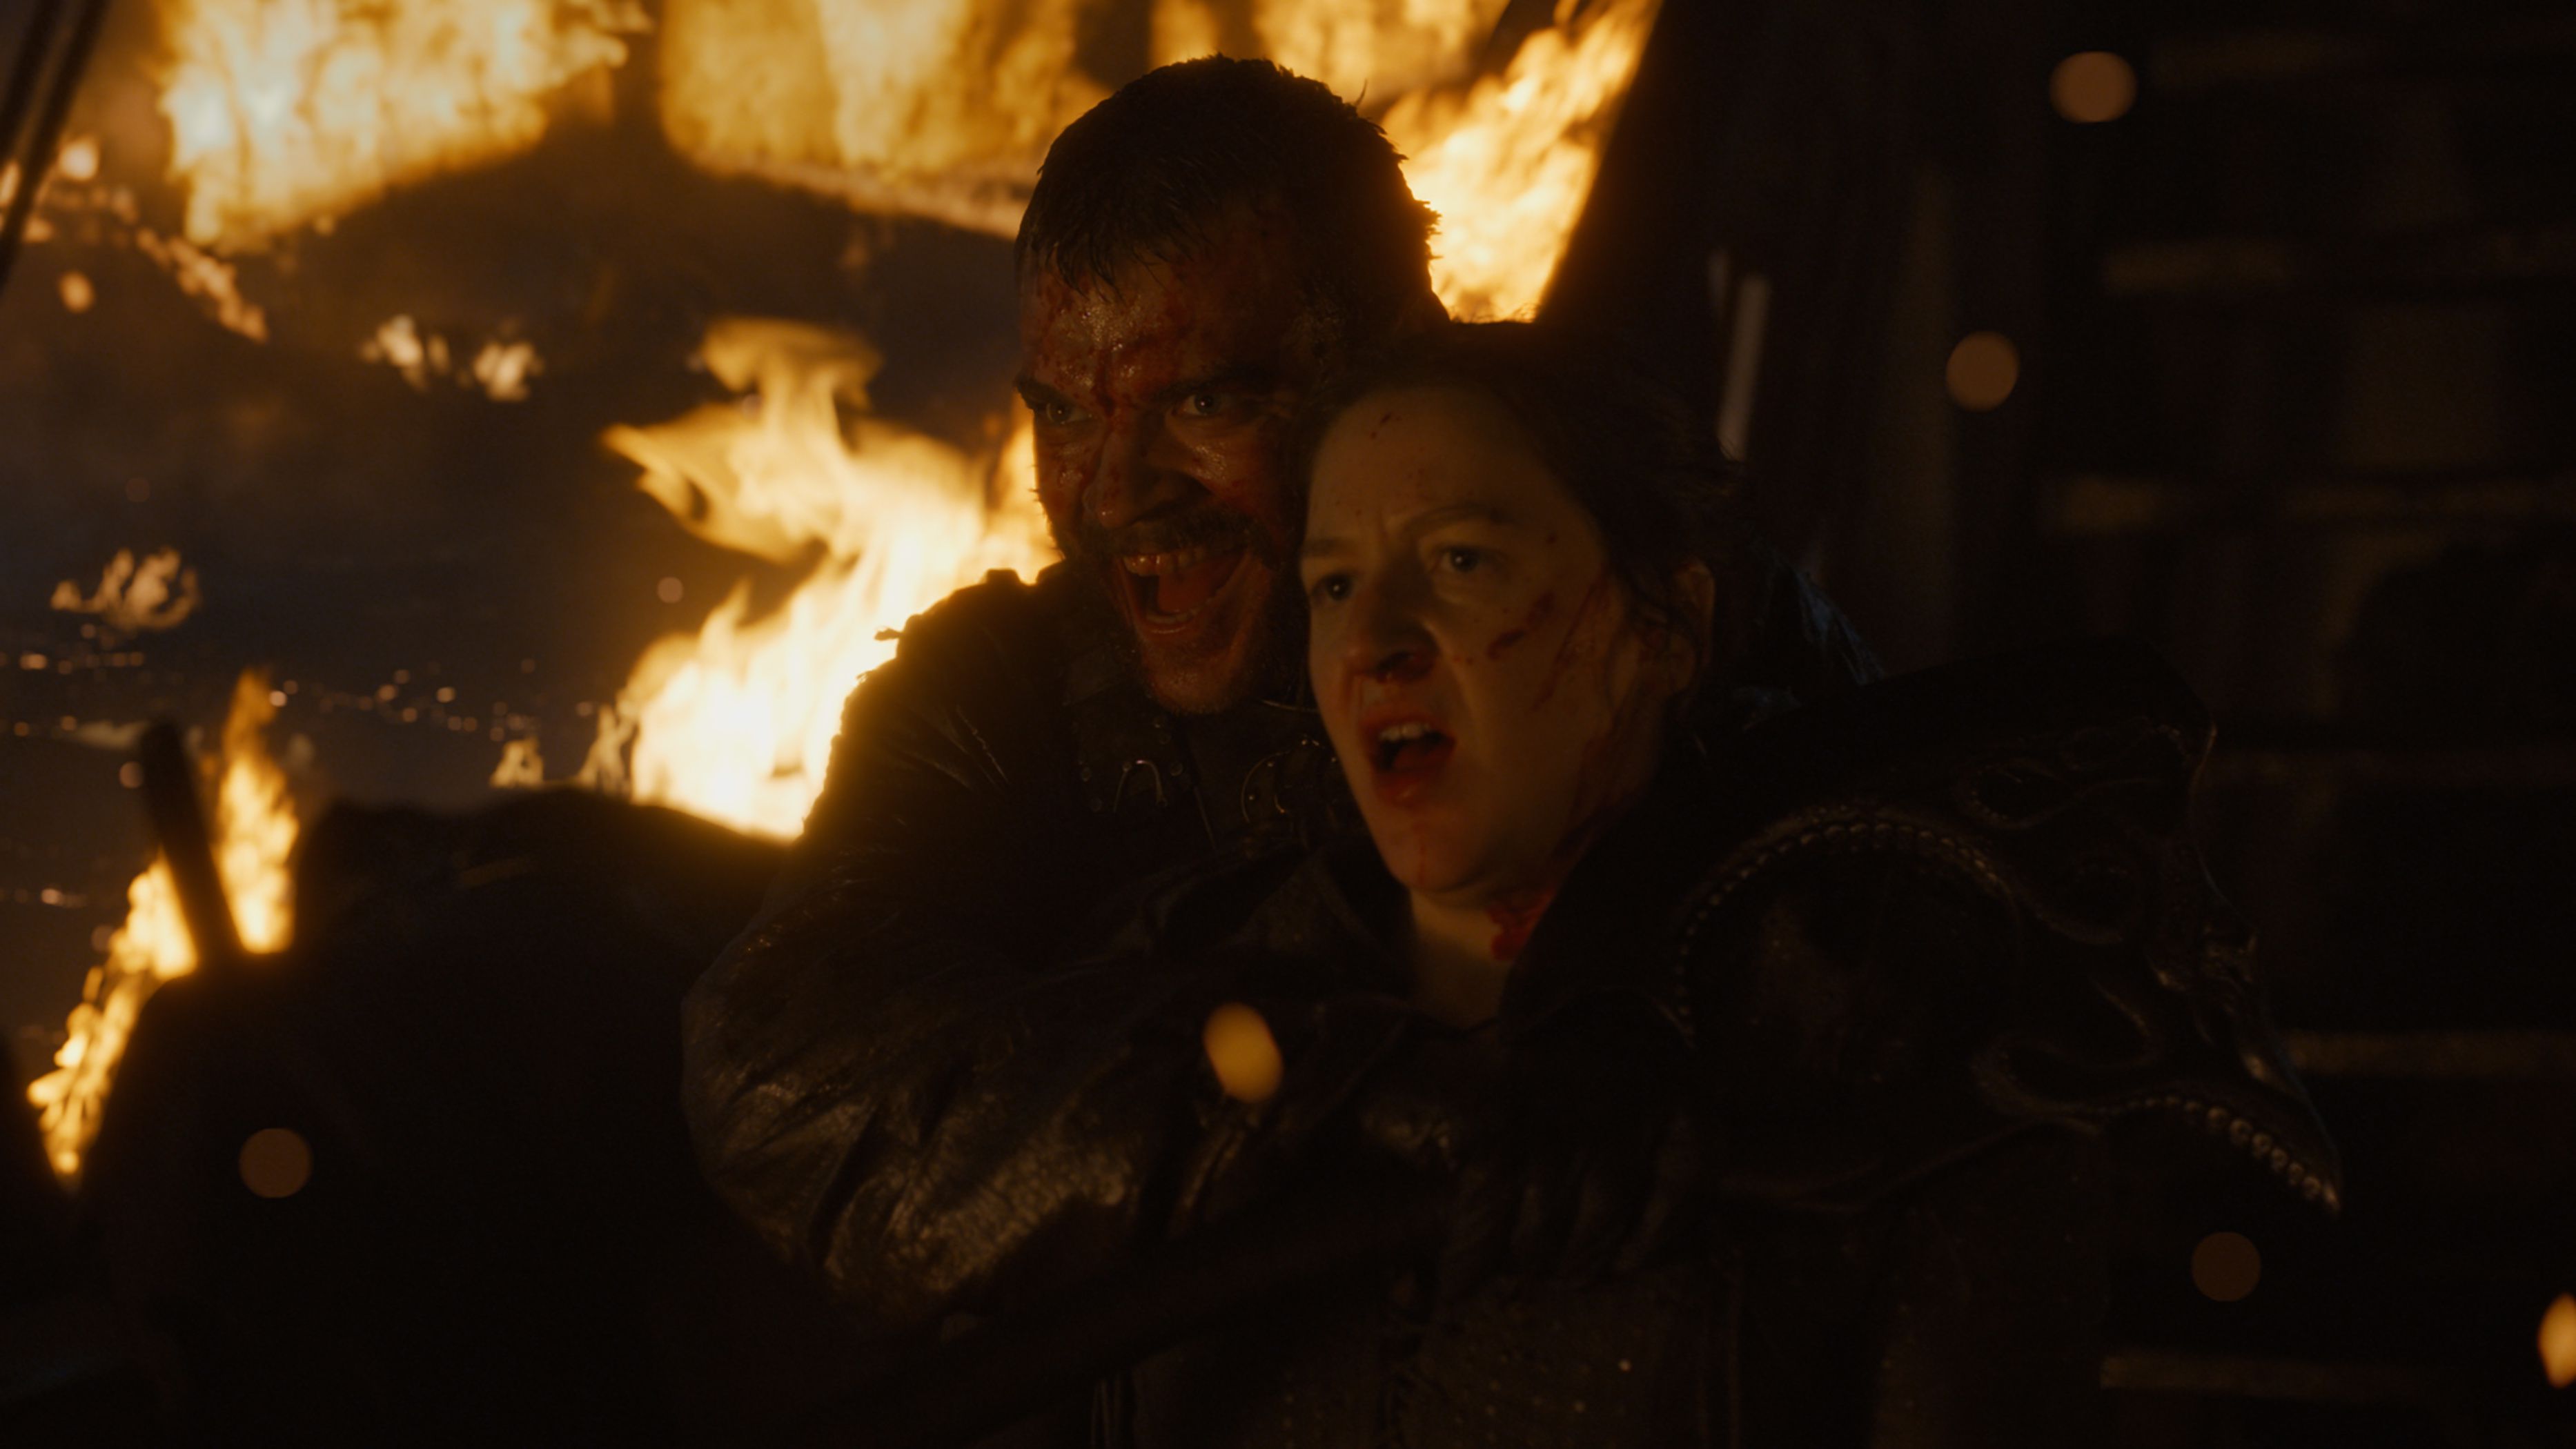 18380f9338205fef69fdcc53e66d95e88d4d13abba8959347e476488fb93c946 Recapping Game of Thrones: Stormborn Sees Through Ice and Fire, Pleasure and Pain